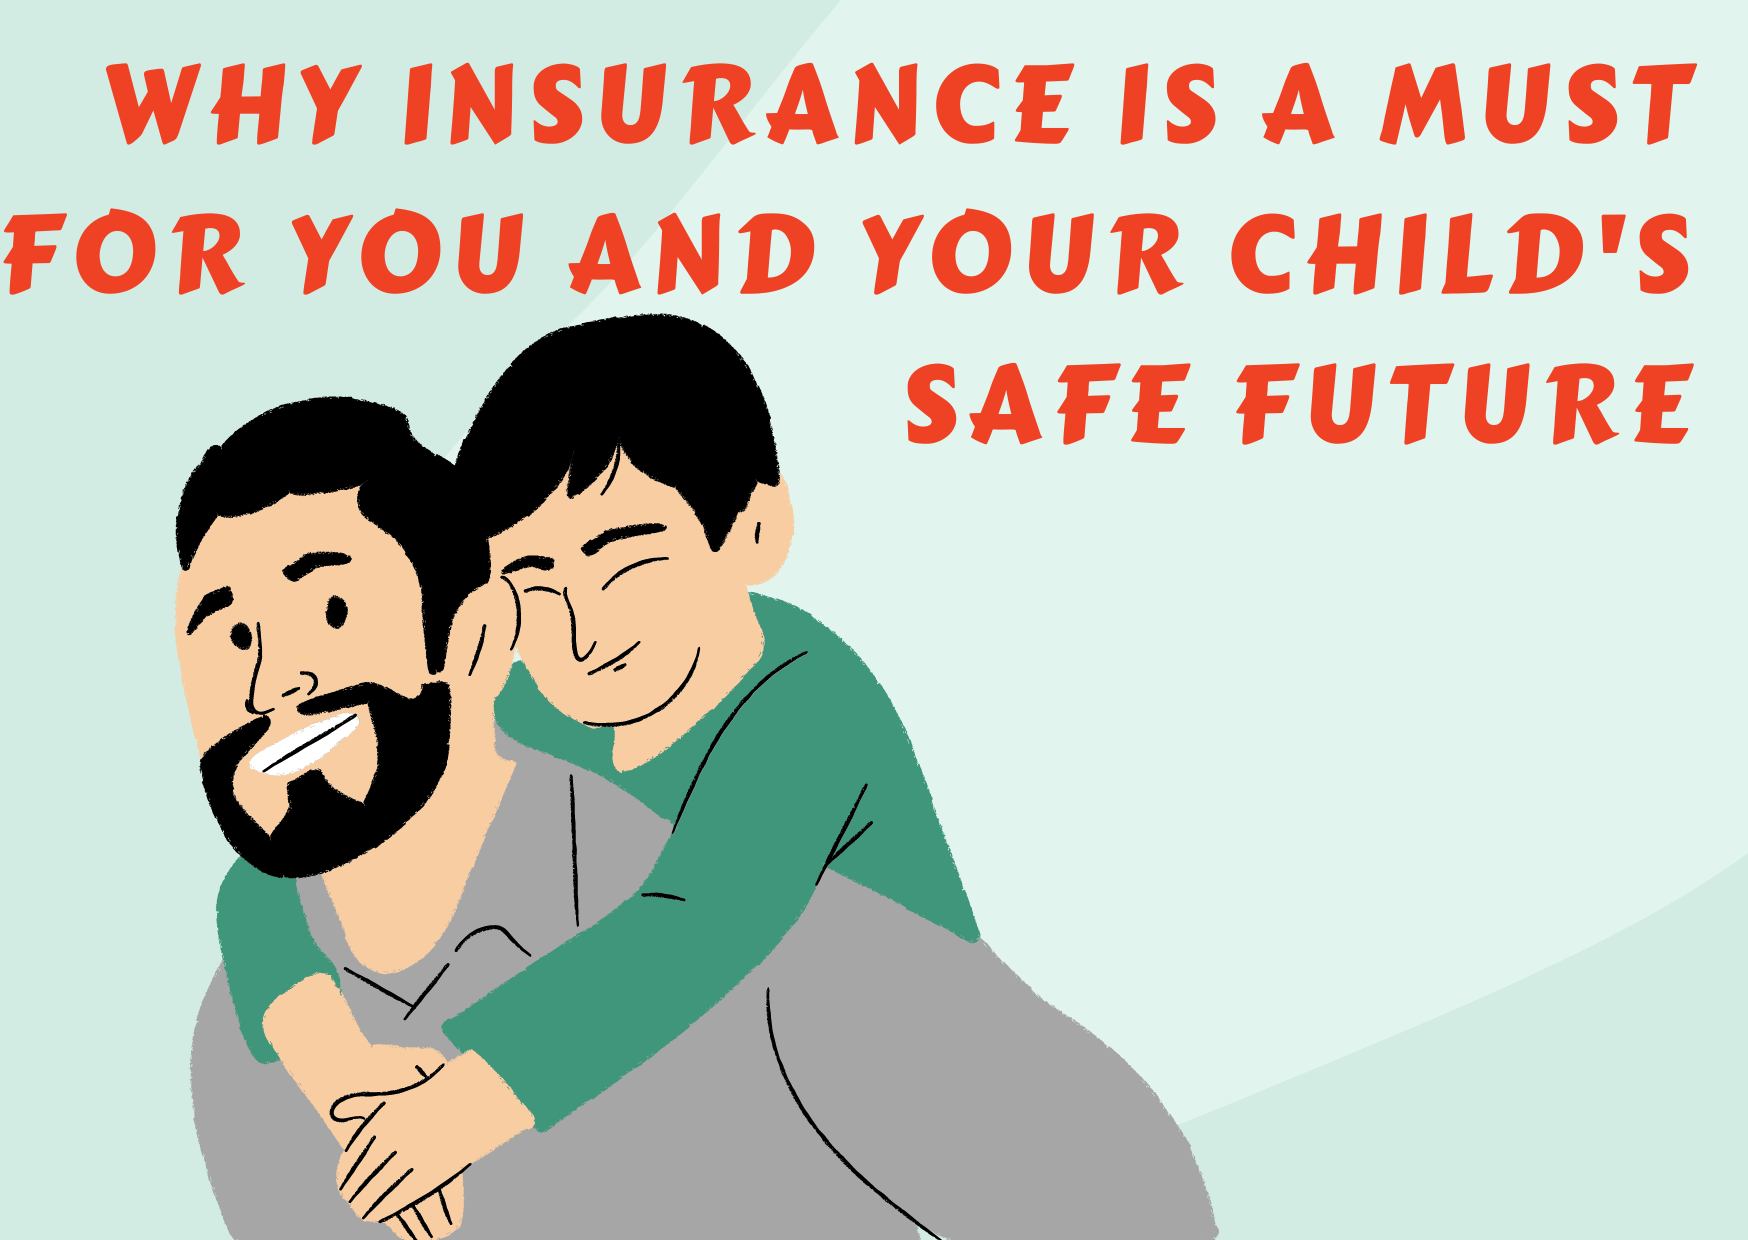 Why Insurance Is A Must For You and Your Child's Safe Future